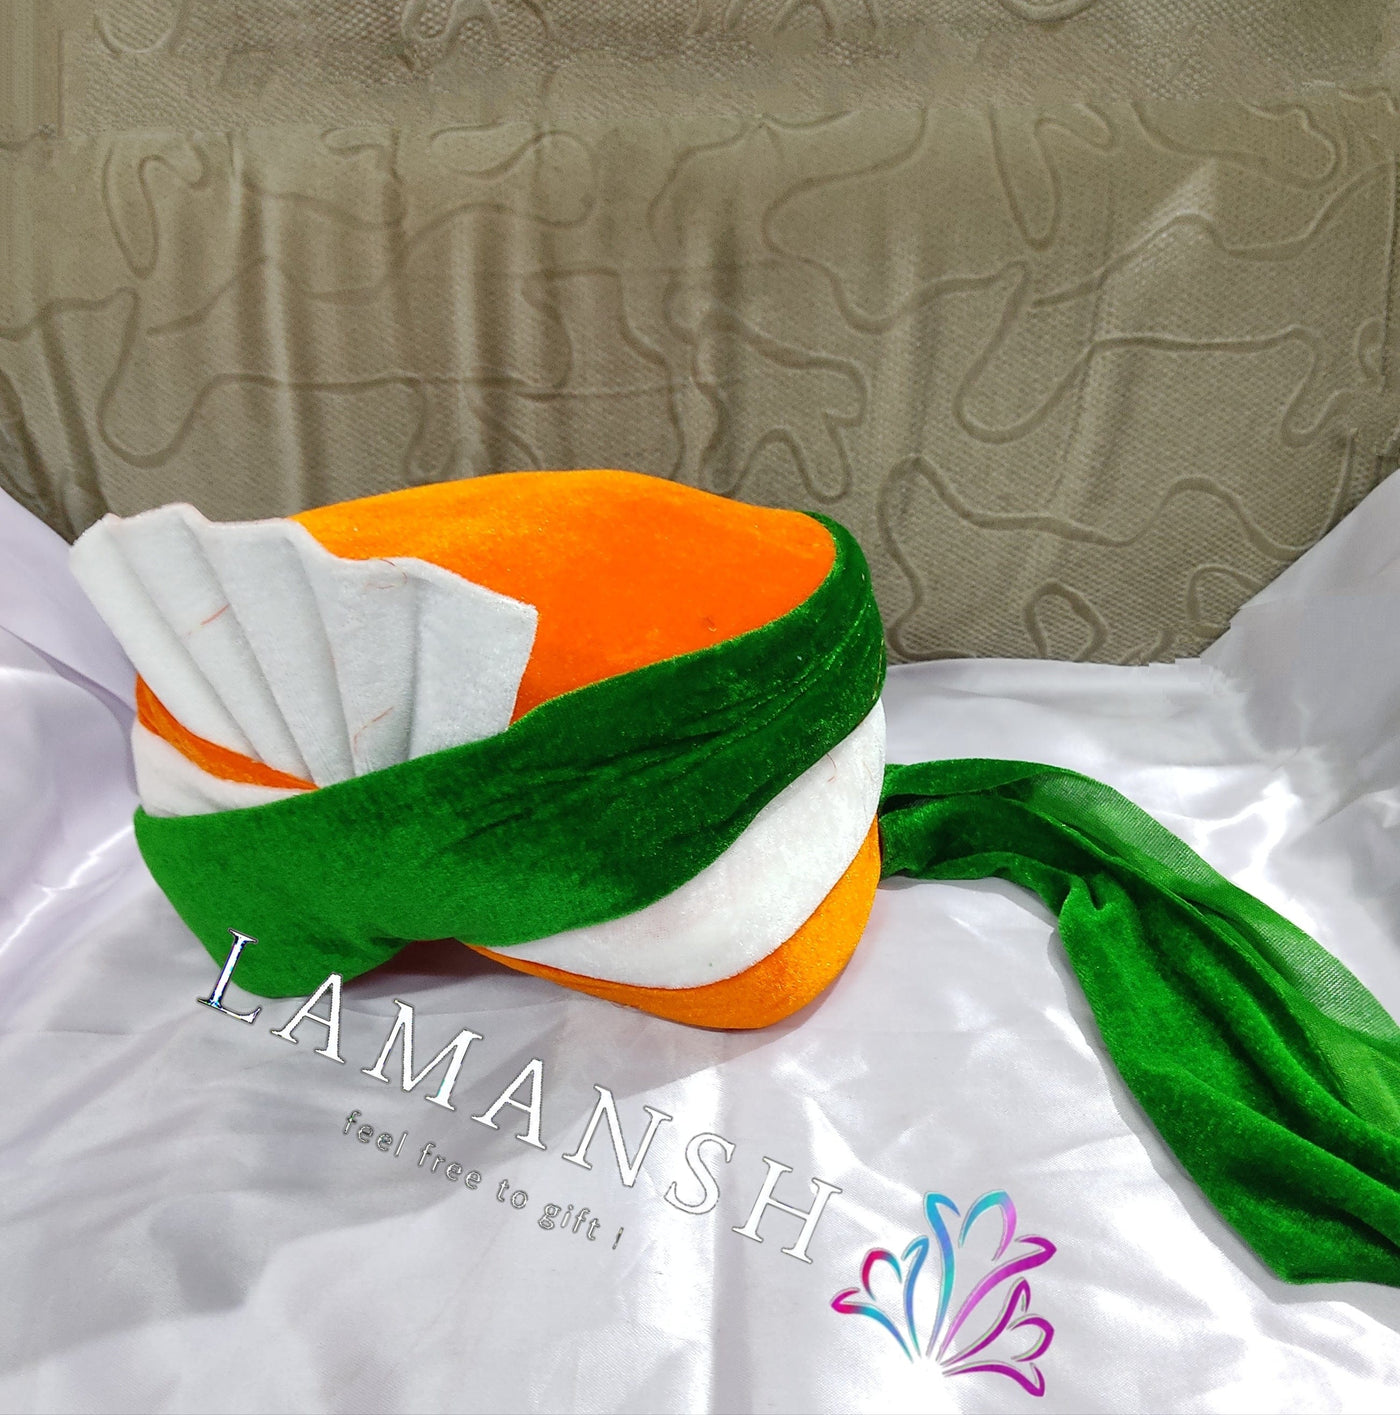 LAMANSH safa pagdi Pack of 100 LAMANSH Pack of 100 Tiranga 🇮🇳 Readymade Safa Pagdi Turban for Guests Welcome in Republic Day / Independence Day Event